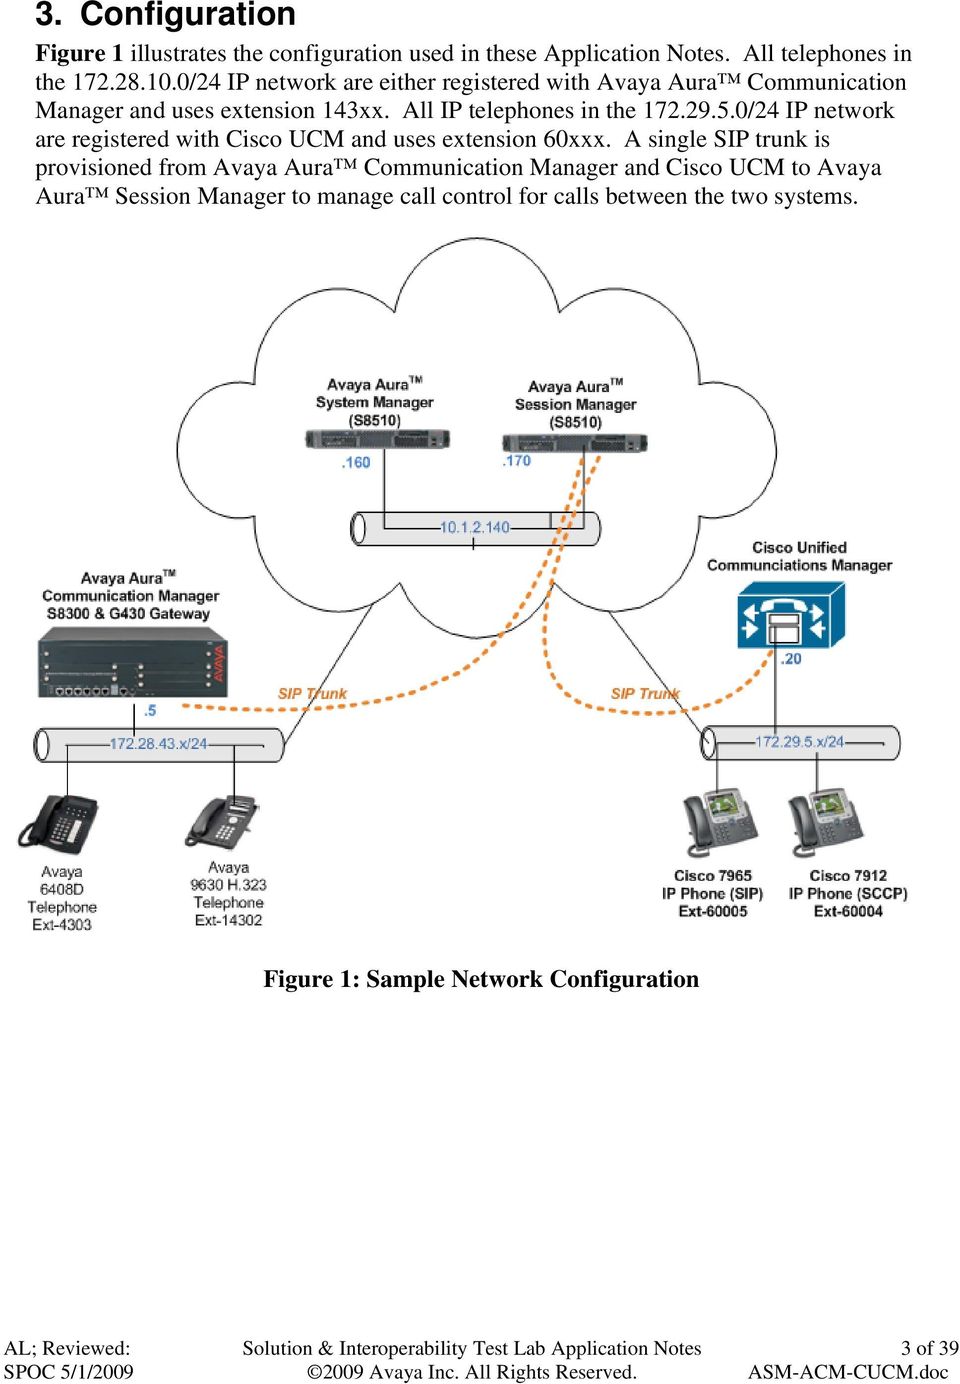 0/24 IP network are registered with Cisco UCM and uses extension 60xxx.